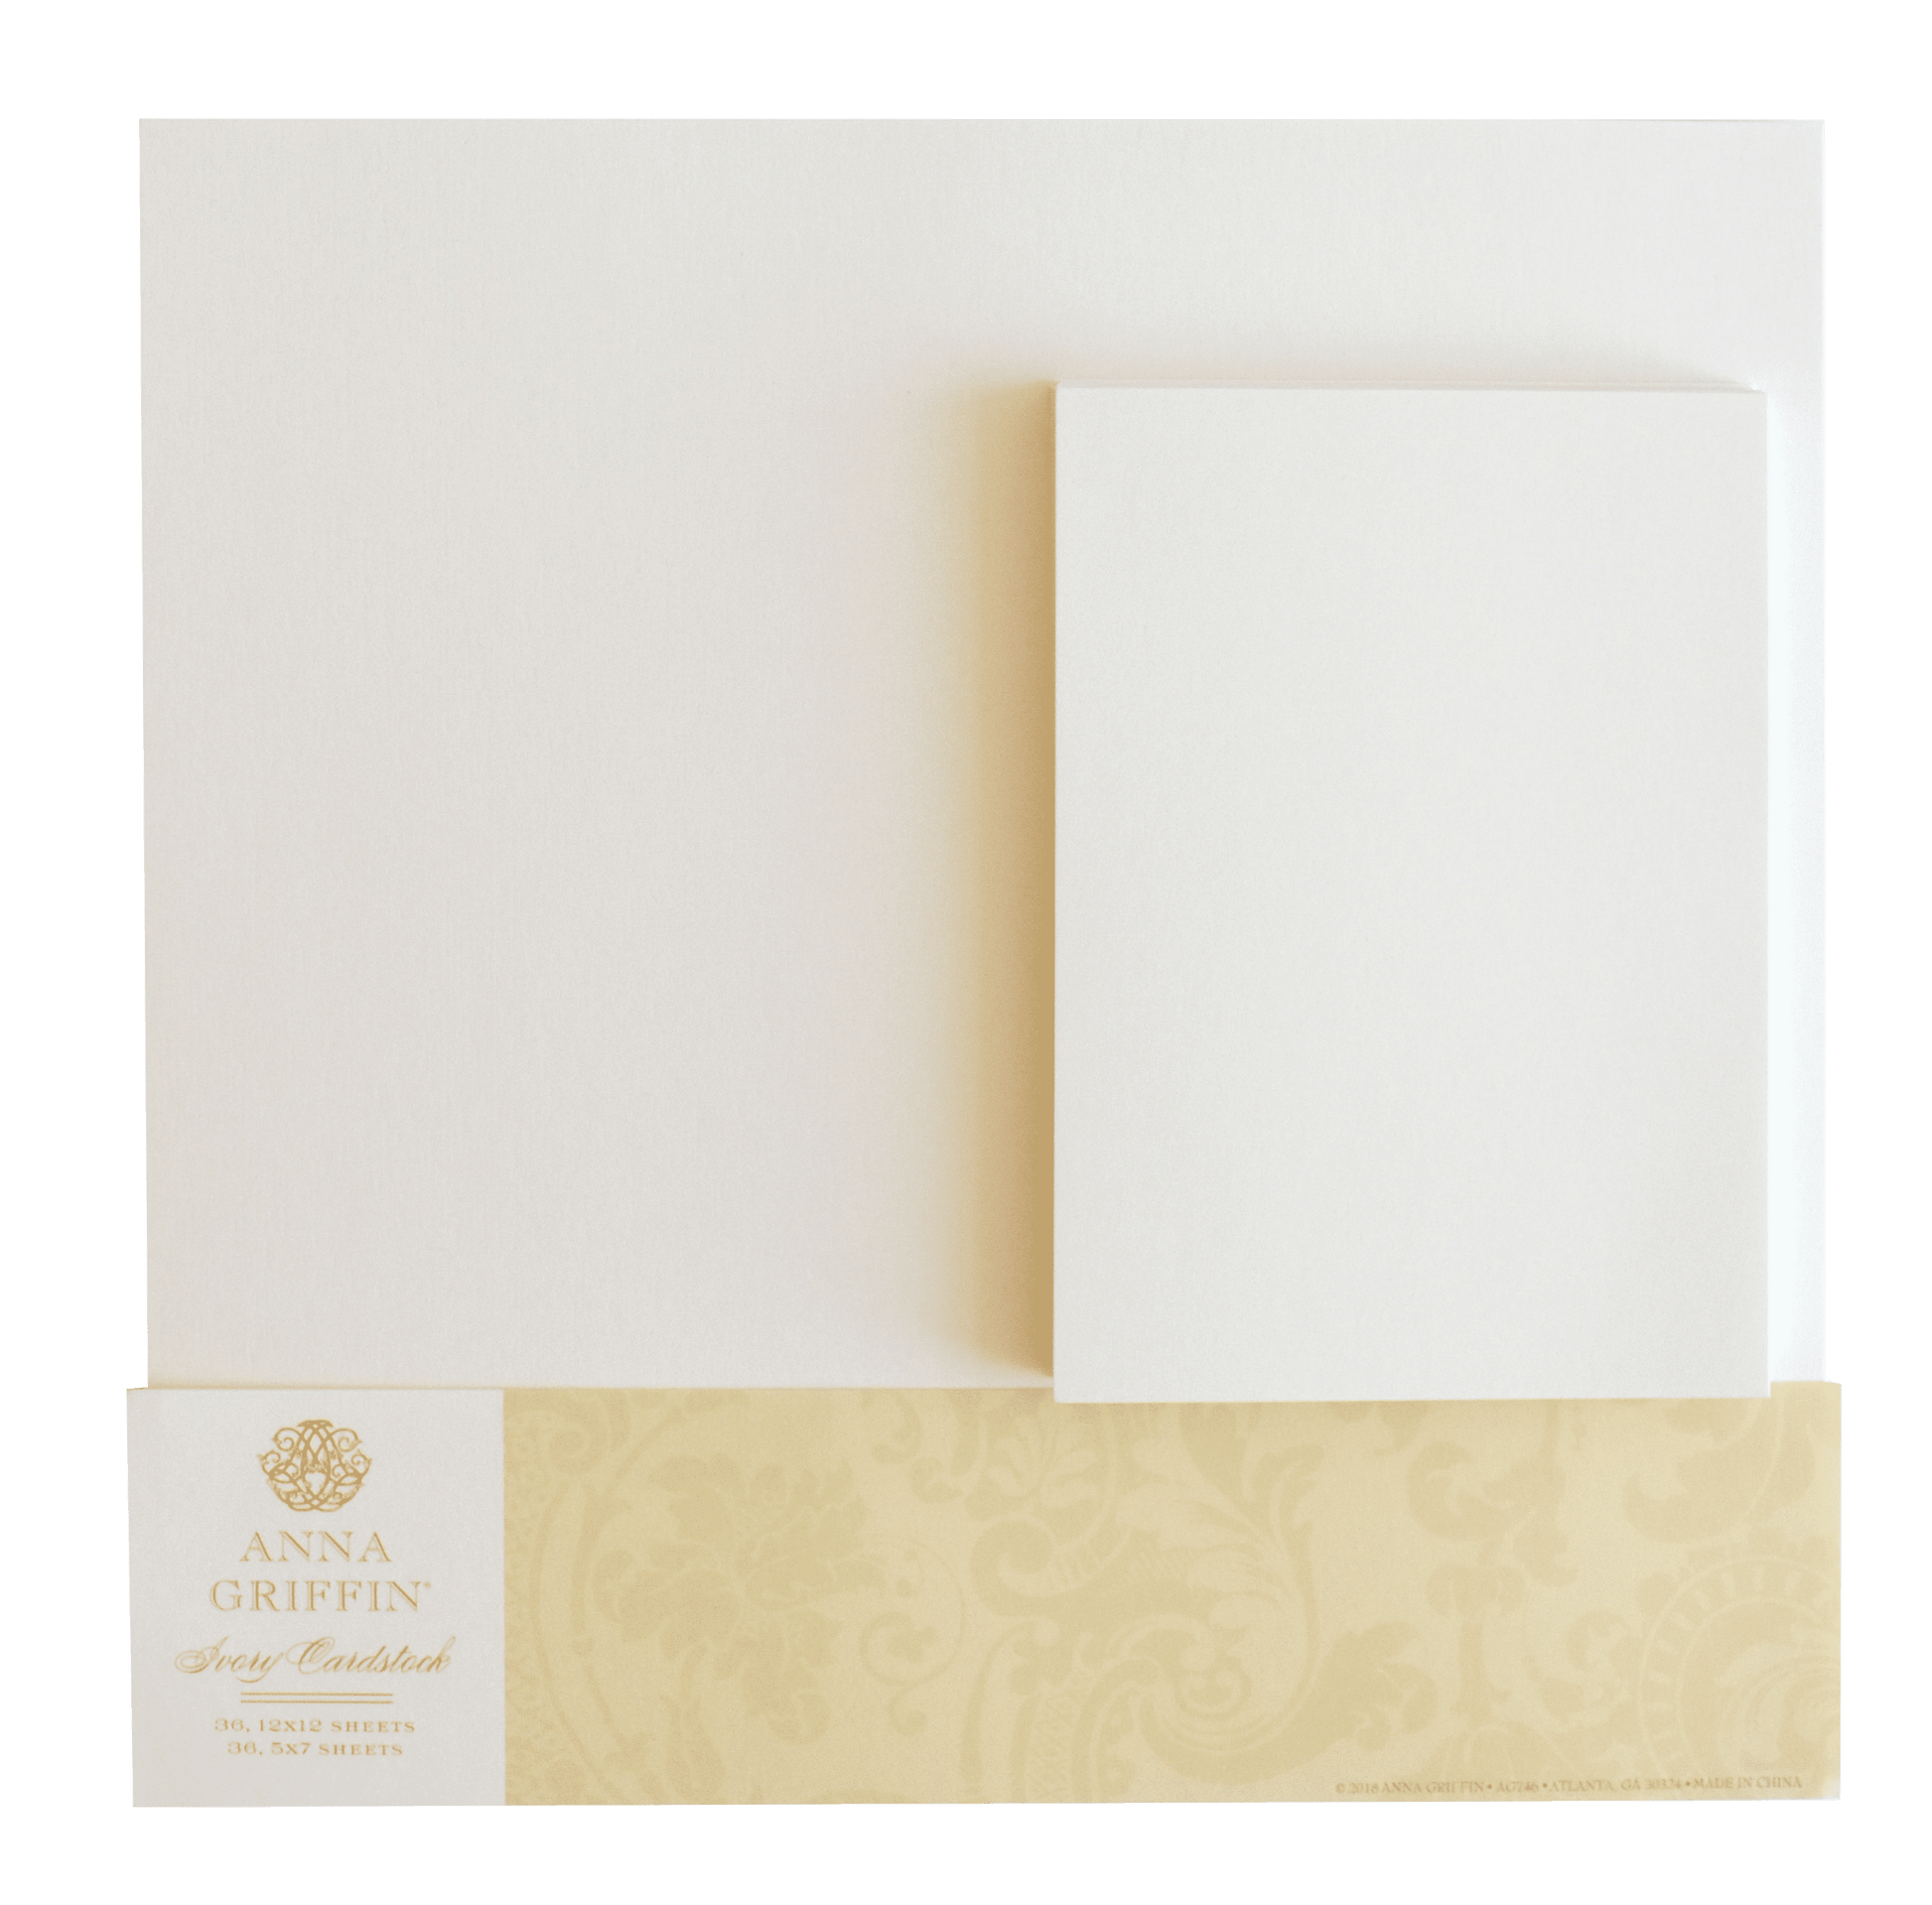 Ivory Card Stock Paper: All Sizes, Premium Papers & Textures